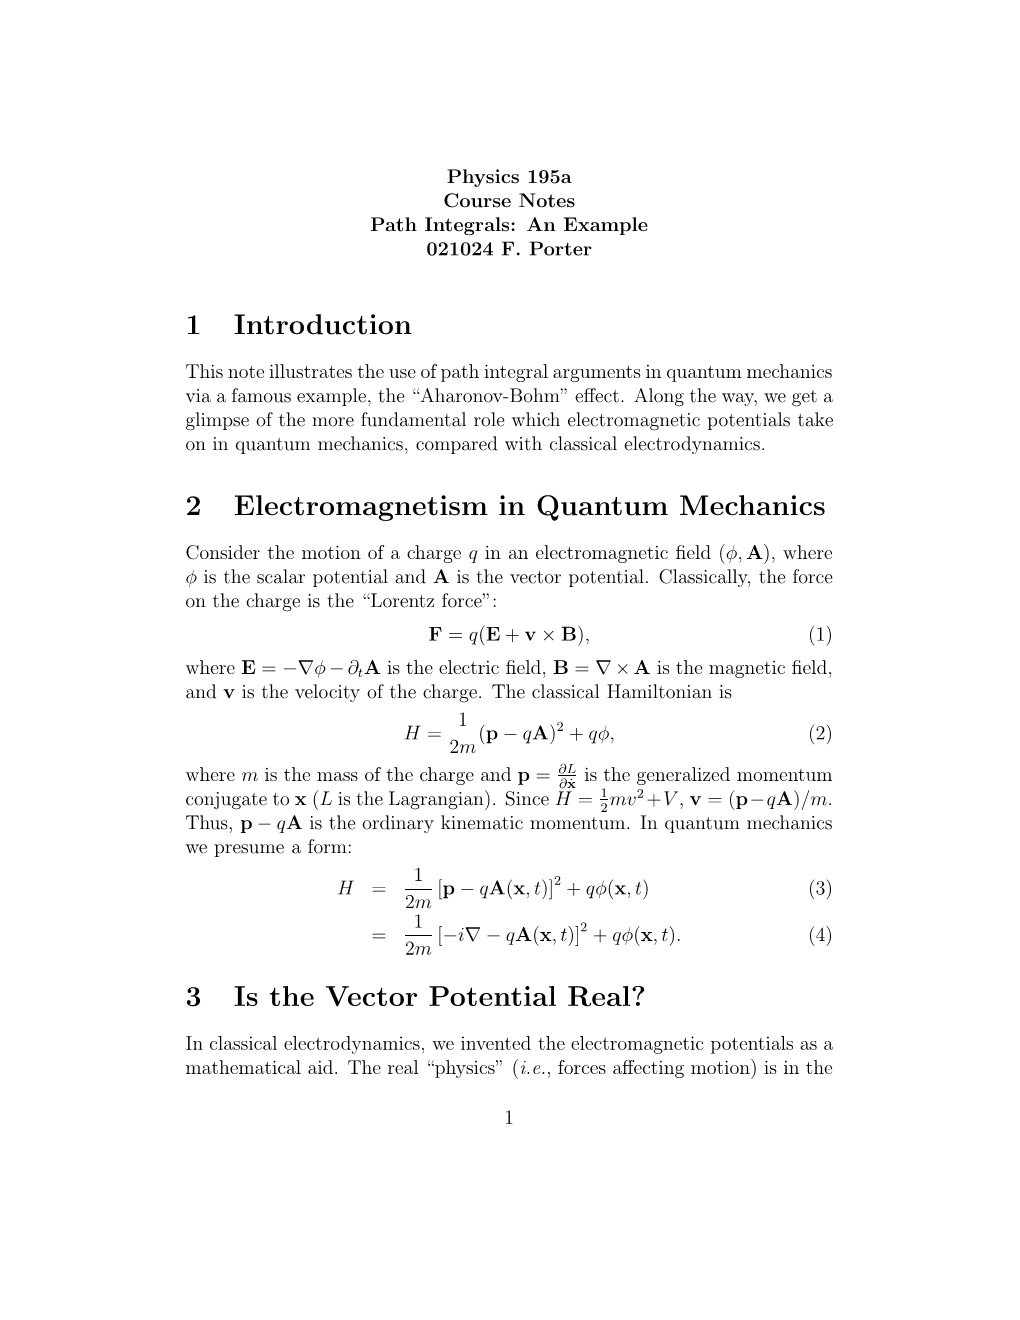 1 Introduction 2 Electromagnetism in Quantum Mechanics 3 Is the Vector